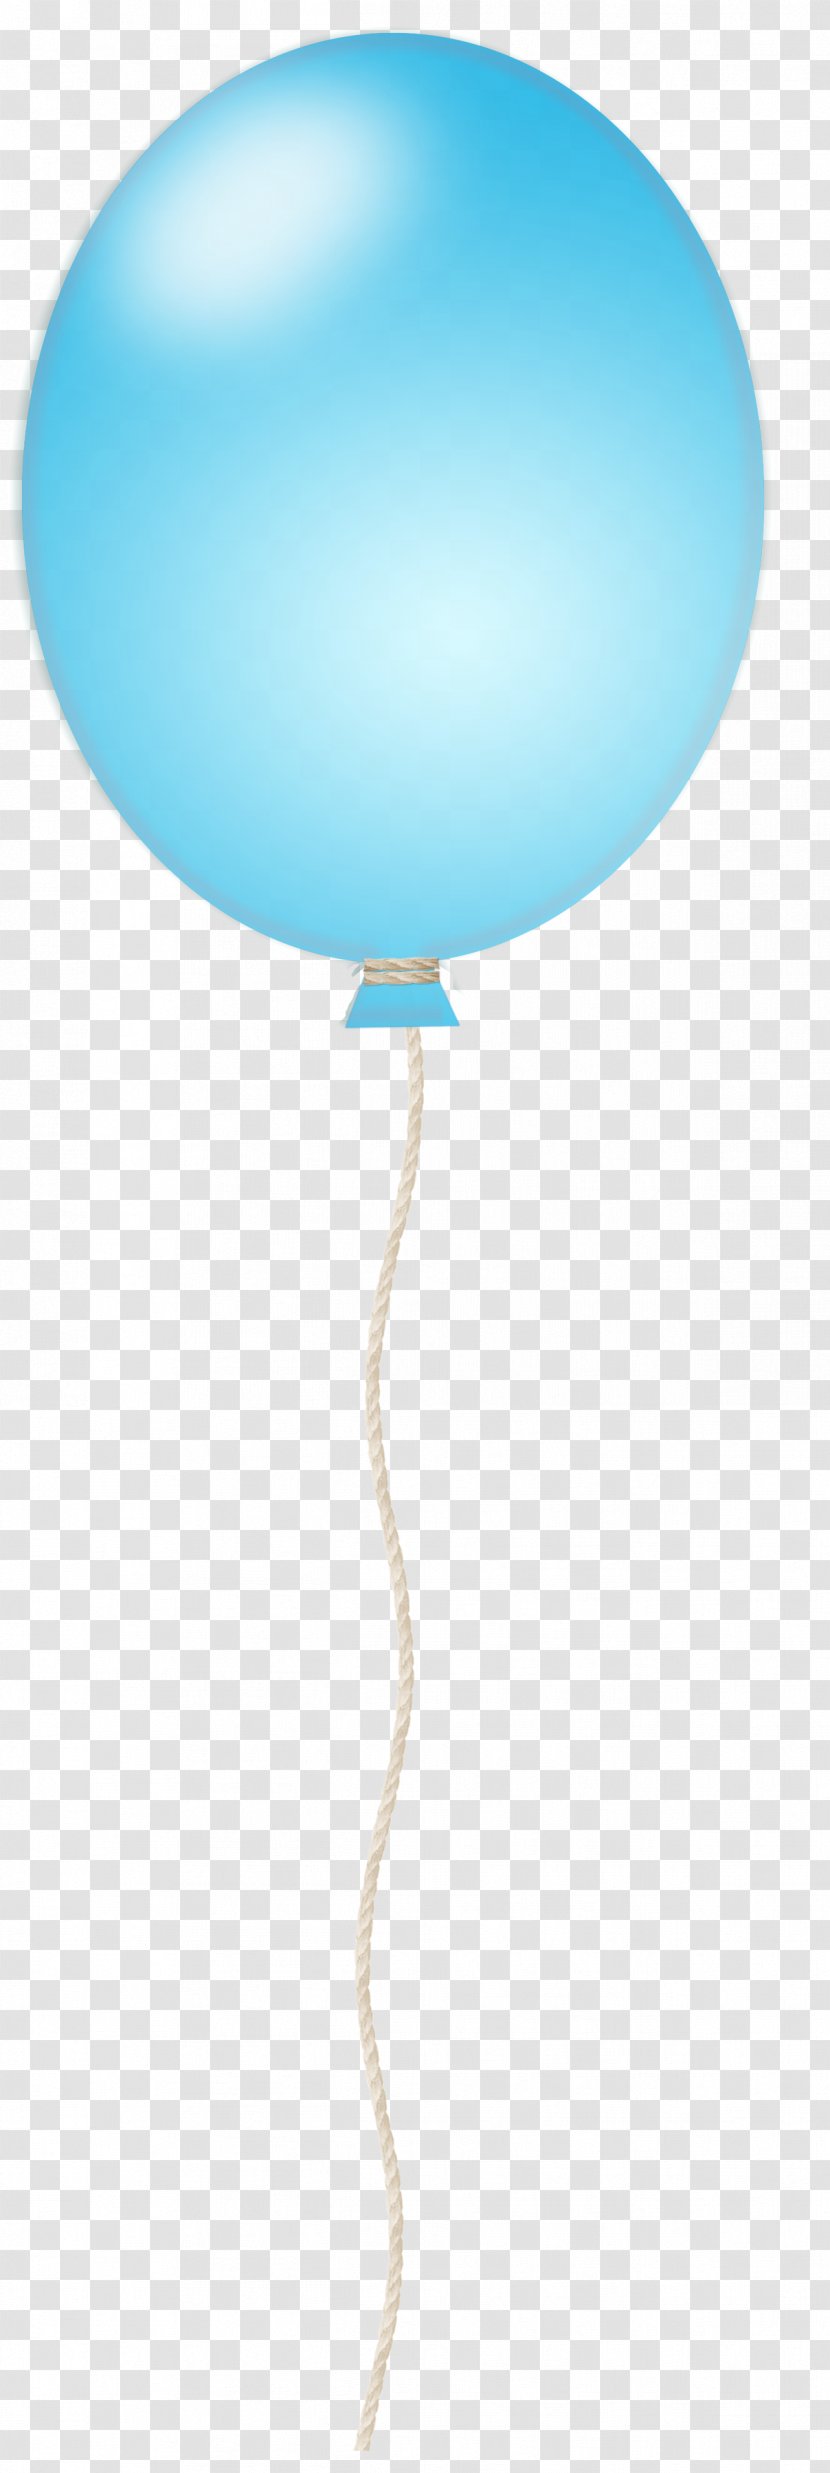 Turquoise Teal Balloon - Text Transparent PNG